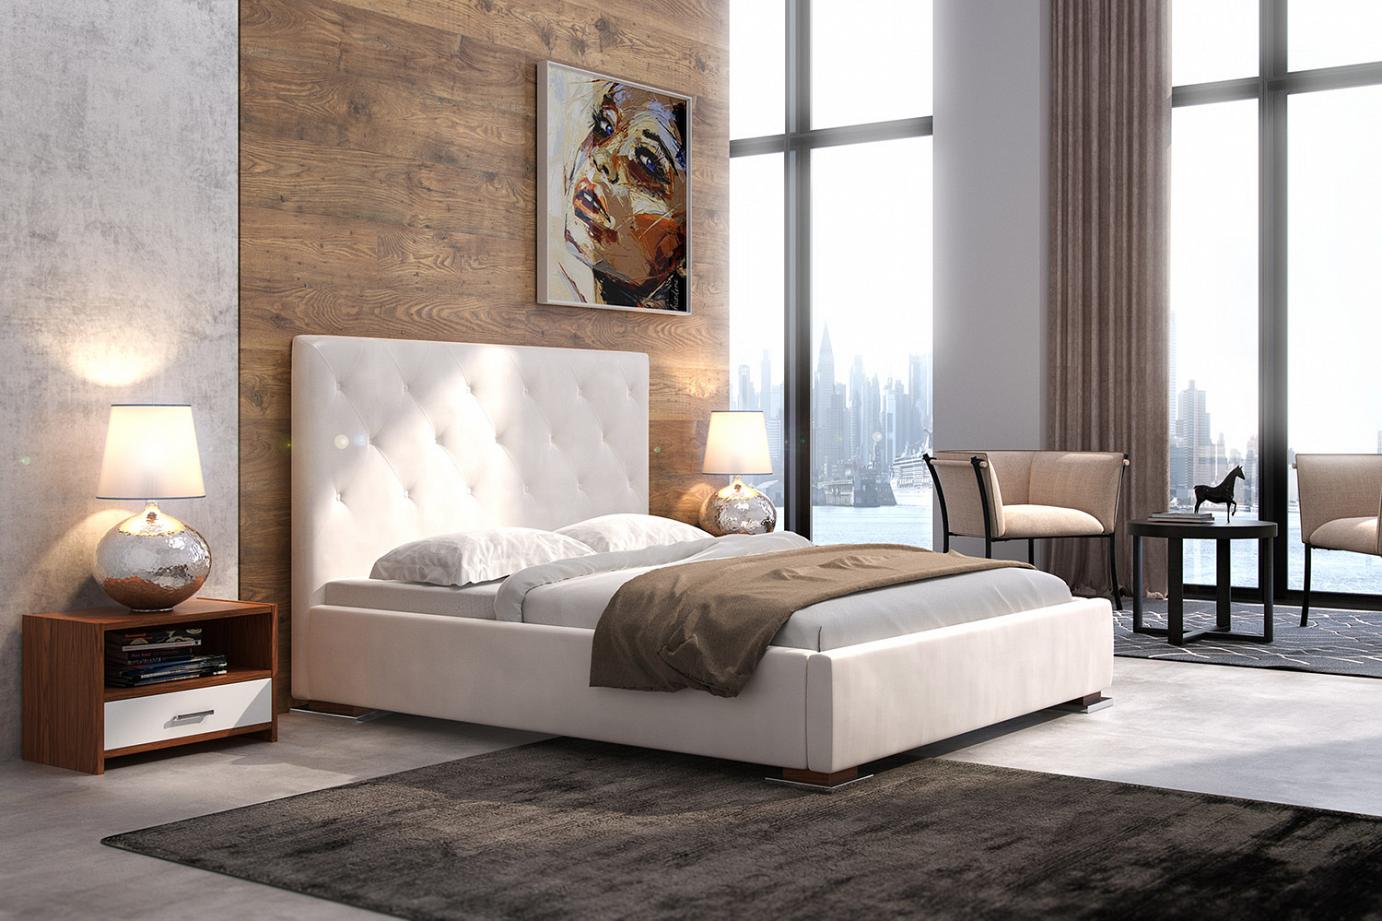 Exclusive Koryntia bed with quilted headboard